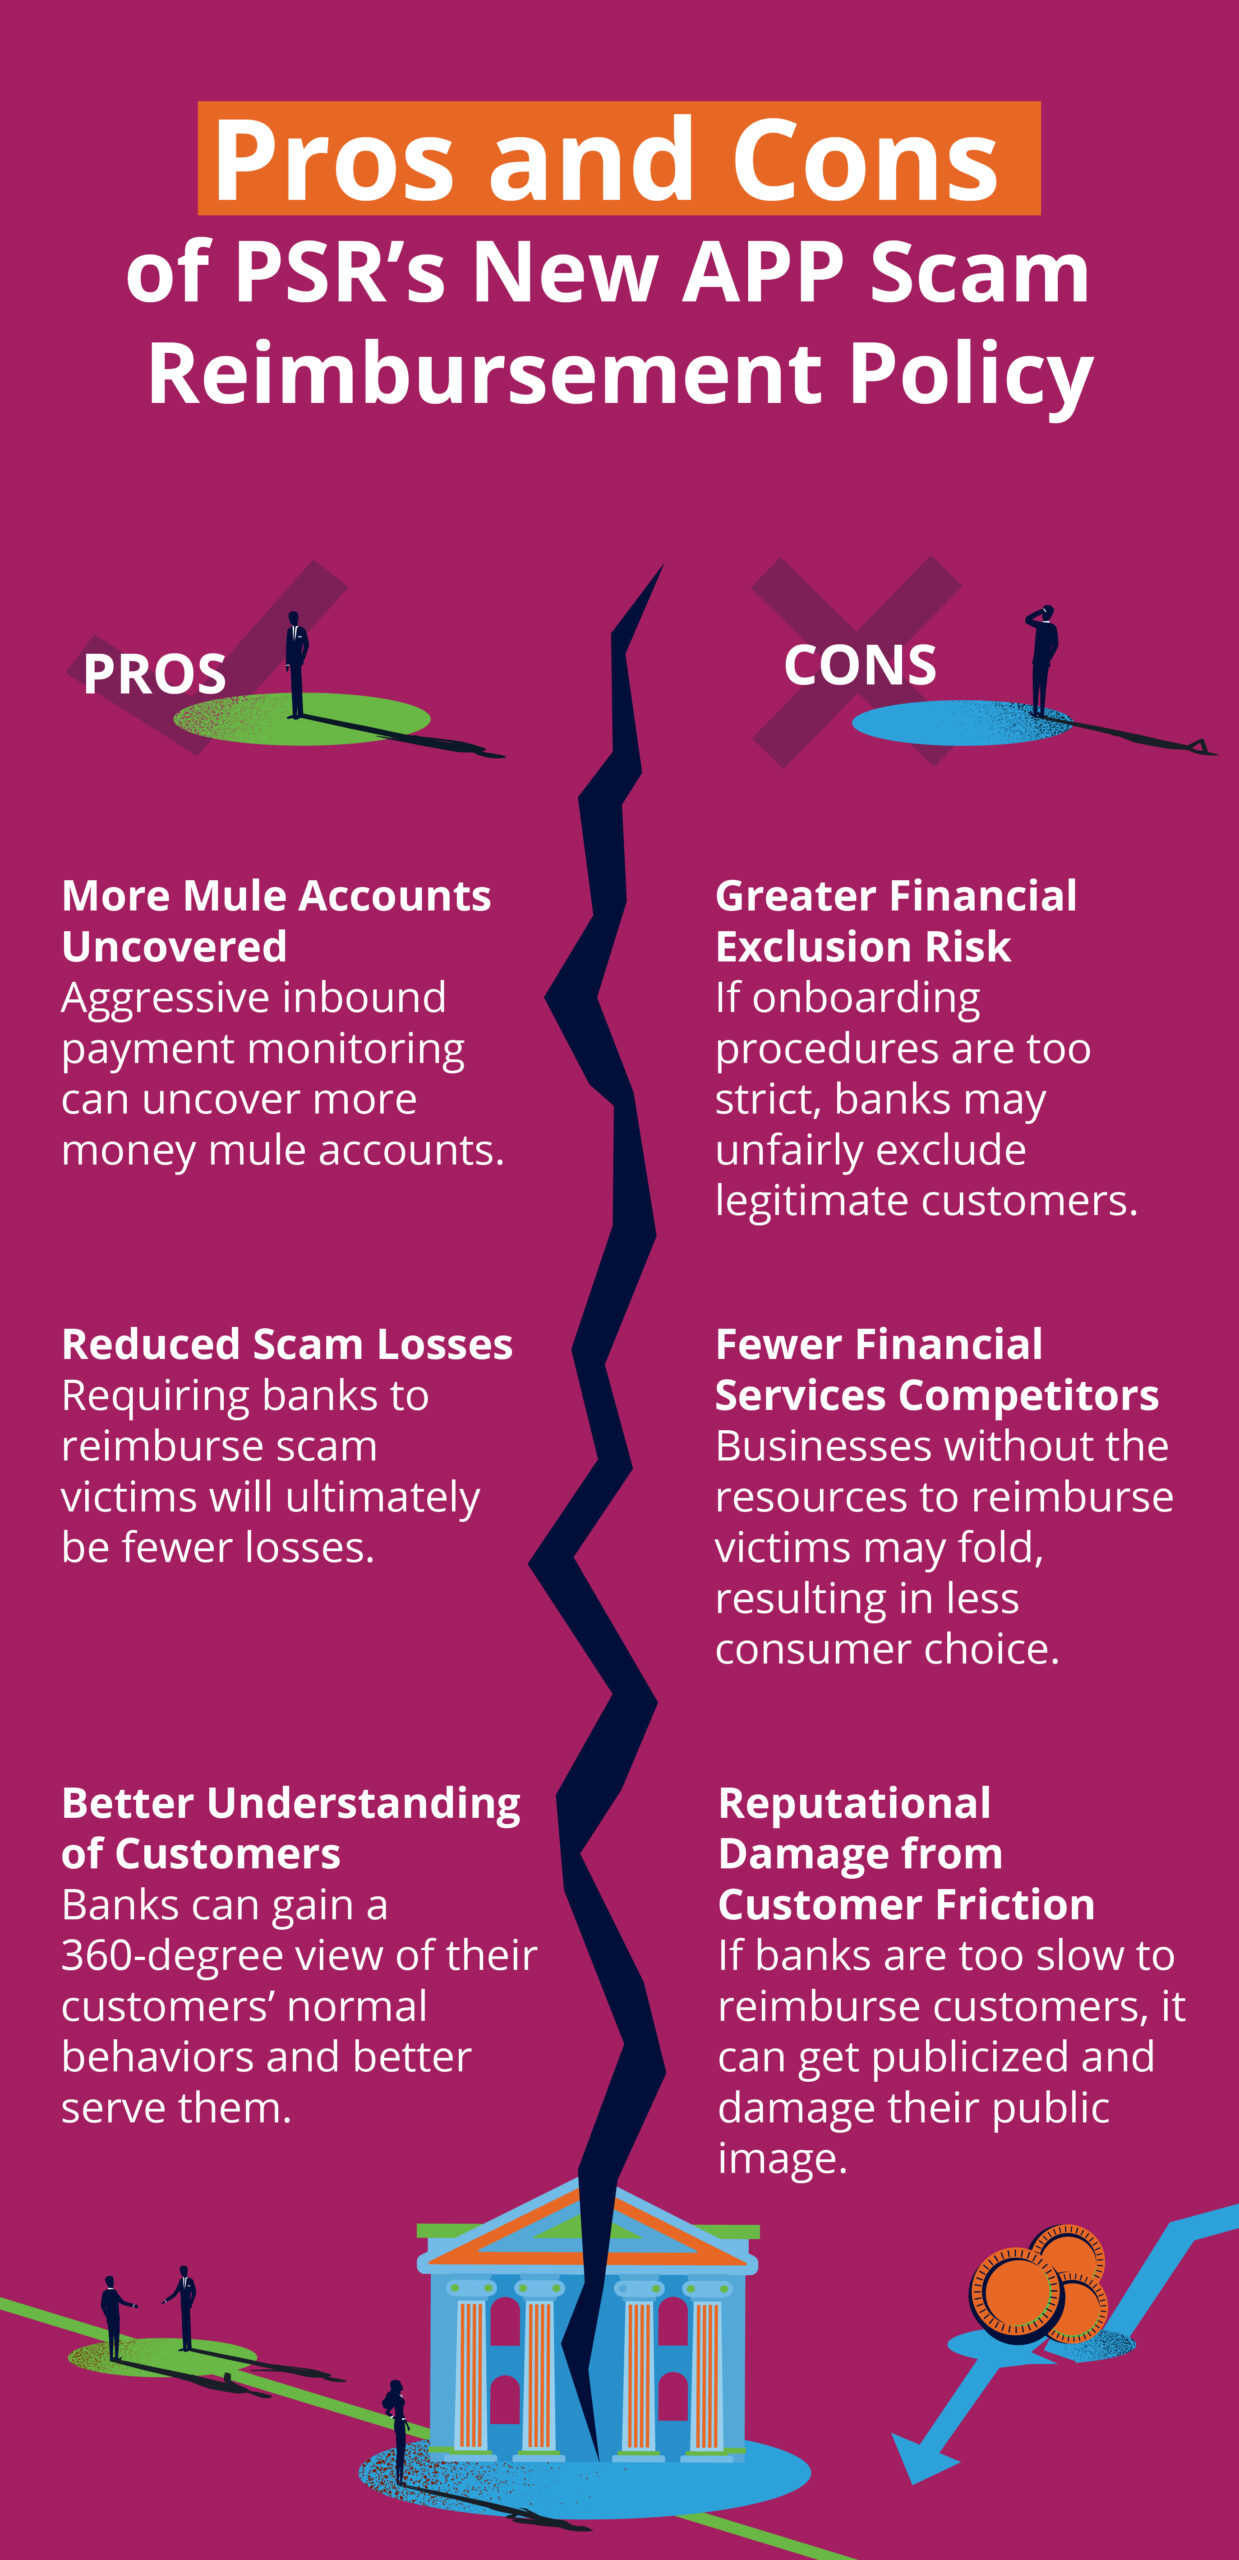 Illustration showing Pros and Cons of UK PSR's new APP scams reimbursement policy - outline of inbound payment monitoring's unintended consequences